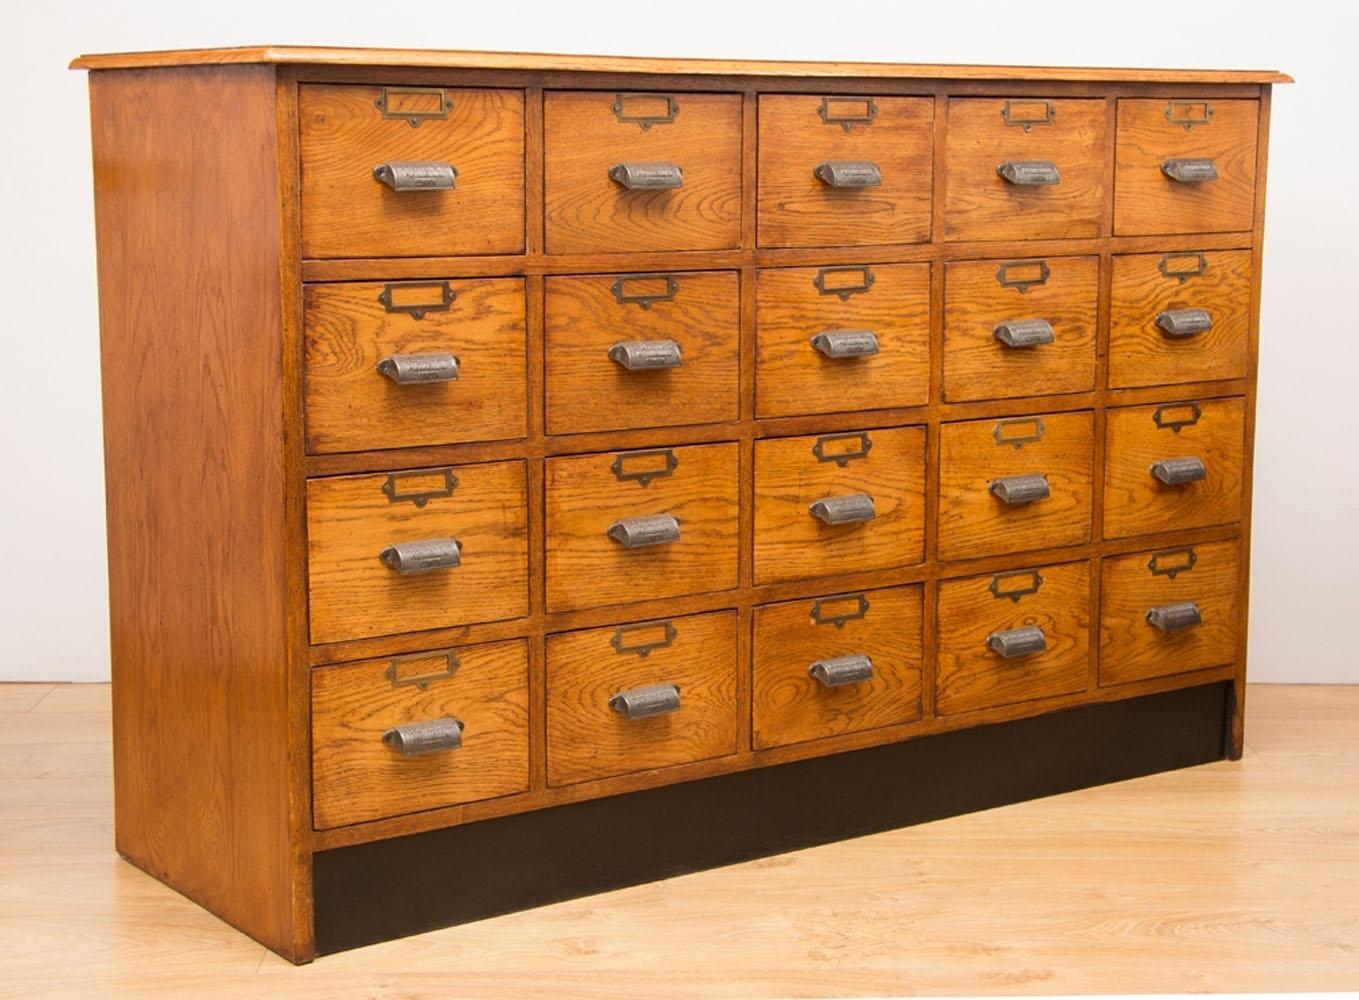 A large vintage style oak bank of drawers.
A fantastically practical bank of A4+ usable drawers which can swallow all the household mess and looks stylish at the same time.